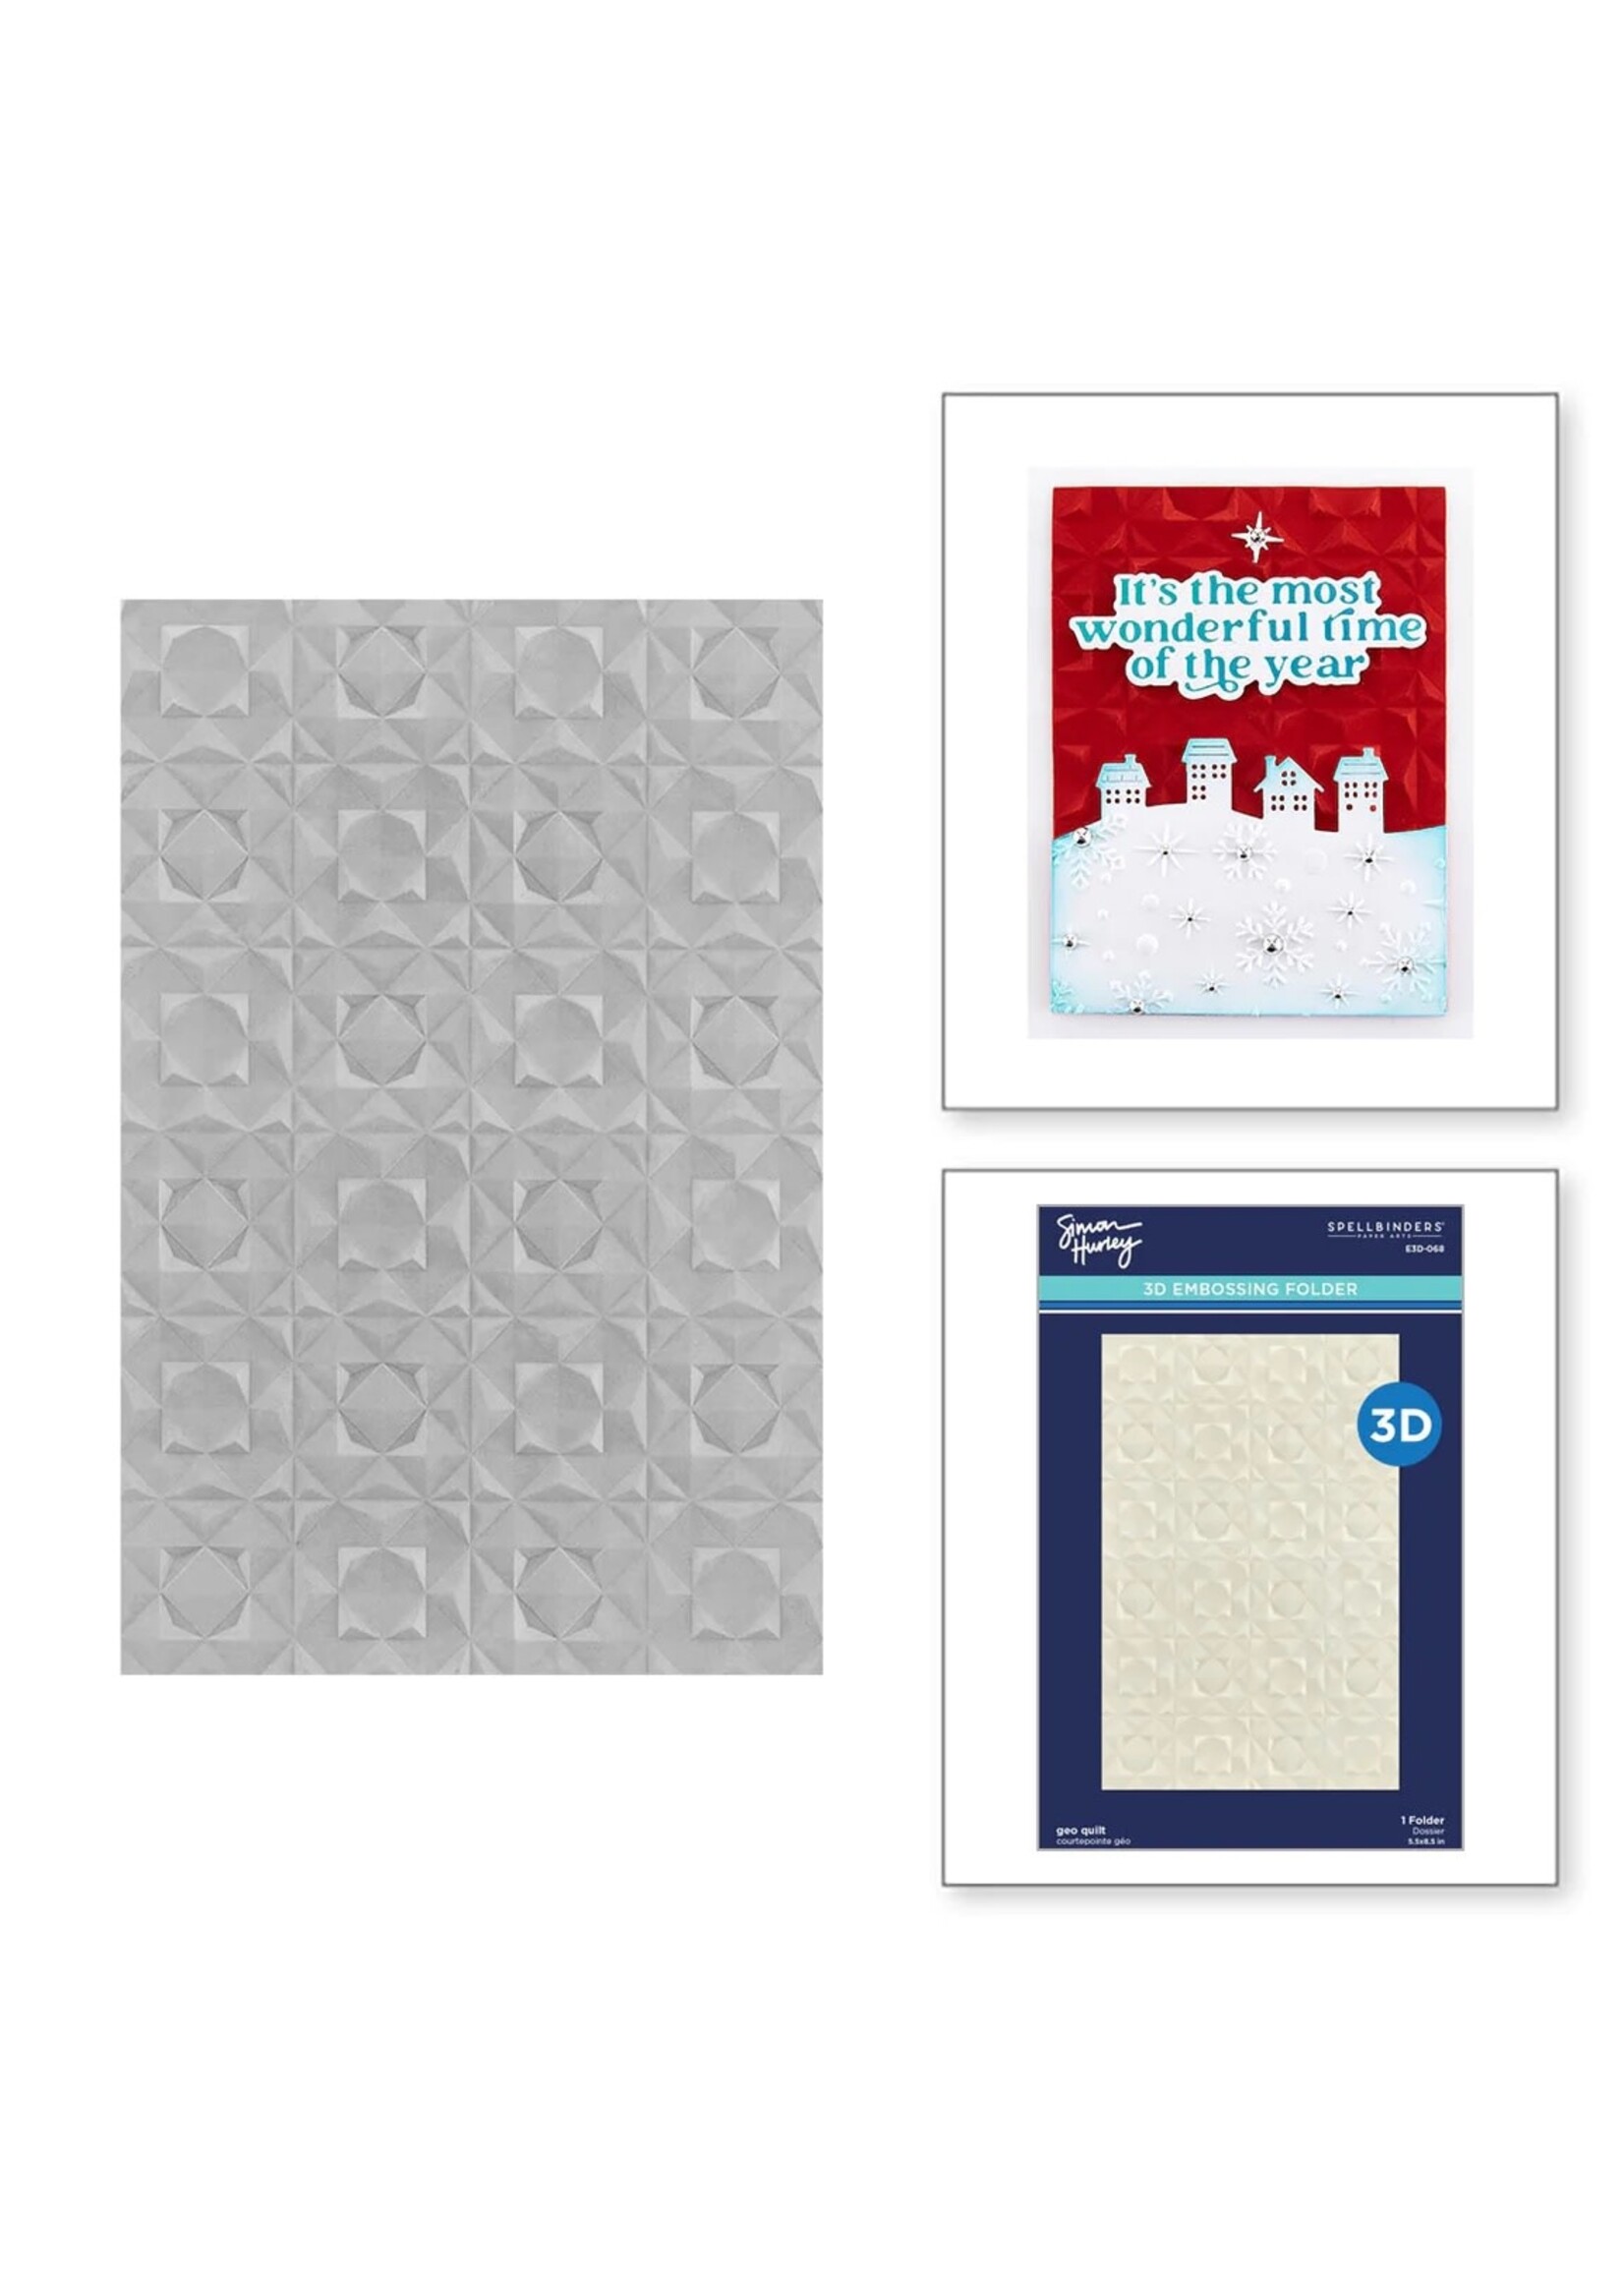 Simon Hurley Geo Quilt 3D Embossing Folder from the Simon's Snow Globes Collection by Simon Hurley